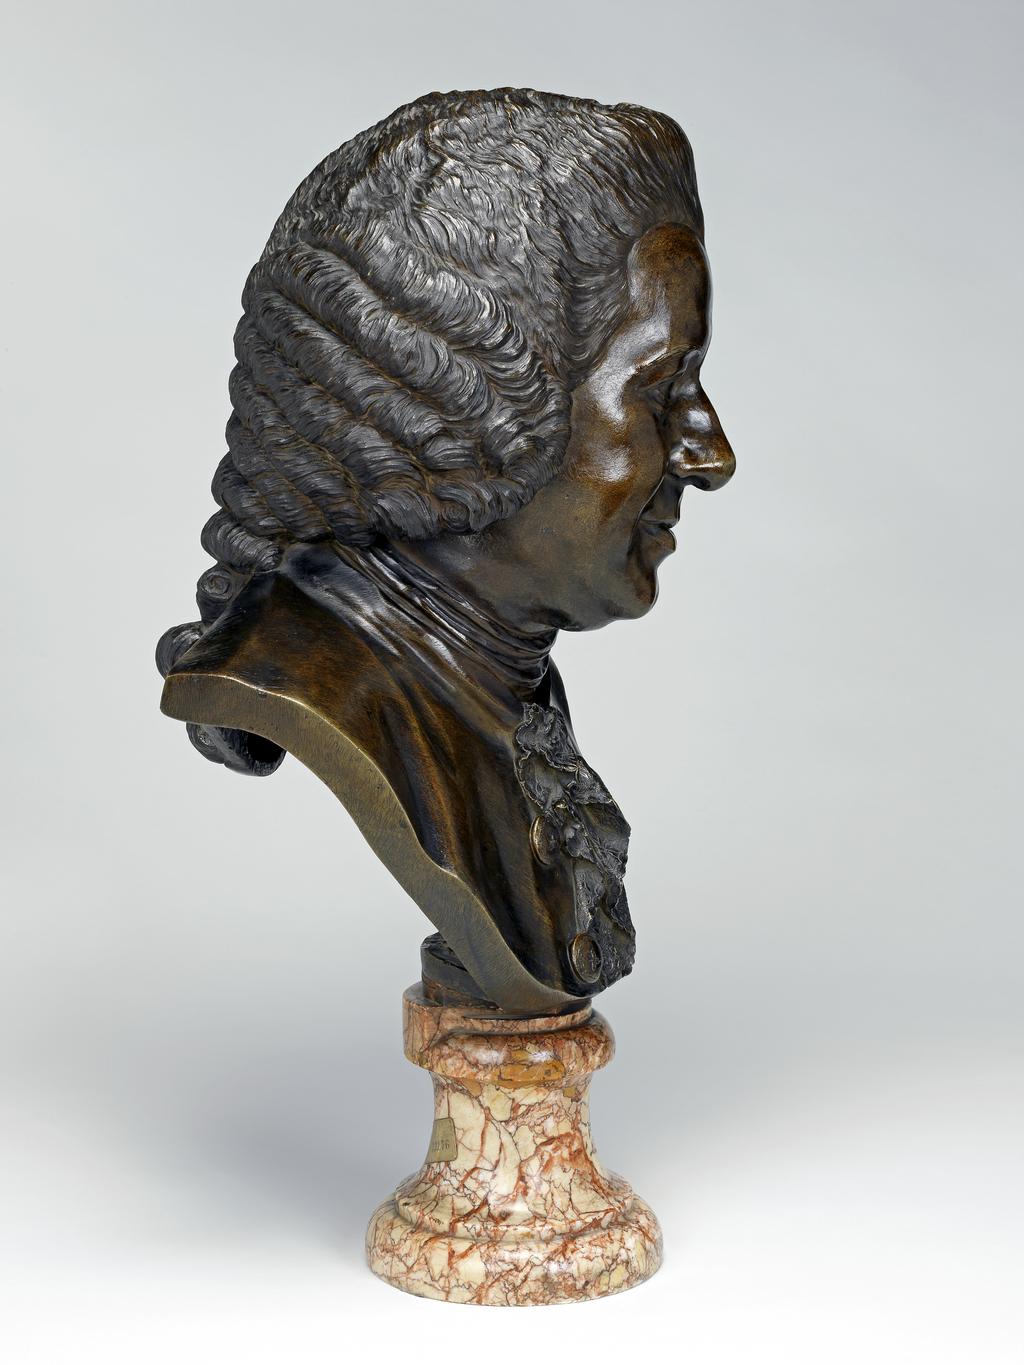 An image of Sculpture/Bust. Portrait bust of Pierre-Louis-Marie Maloët. Pigalle, Jean-Baptiste (French, 1714-1785). Bronze, cast and chased, original marble socle, height, whole, 62.0 cm, height, bust, 45.7 cm, width, bust, 34.0 cm, circa 1775-1785. Louis XVI.